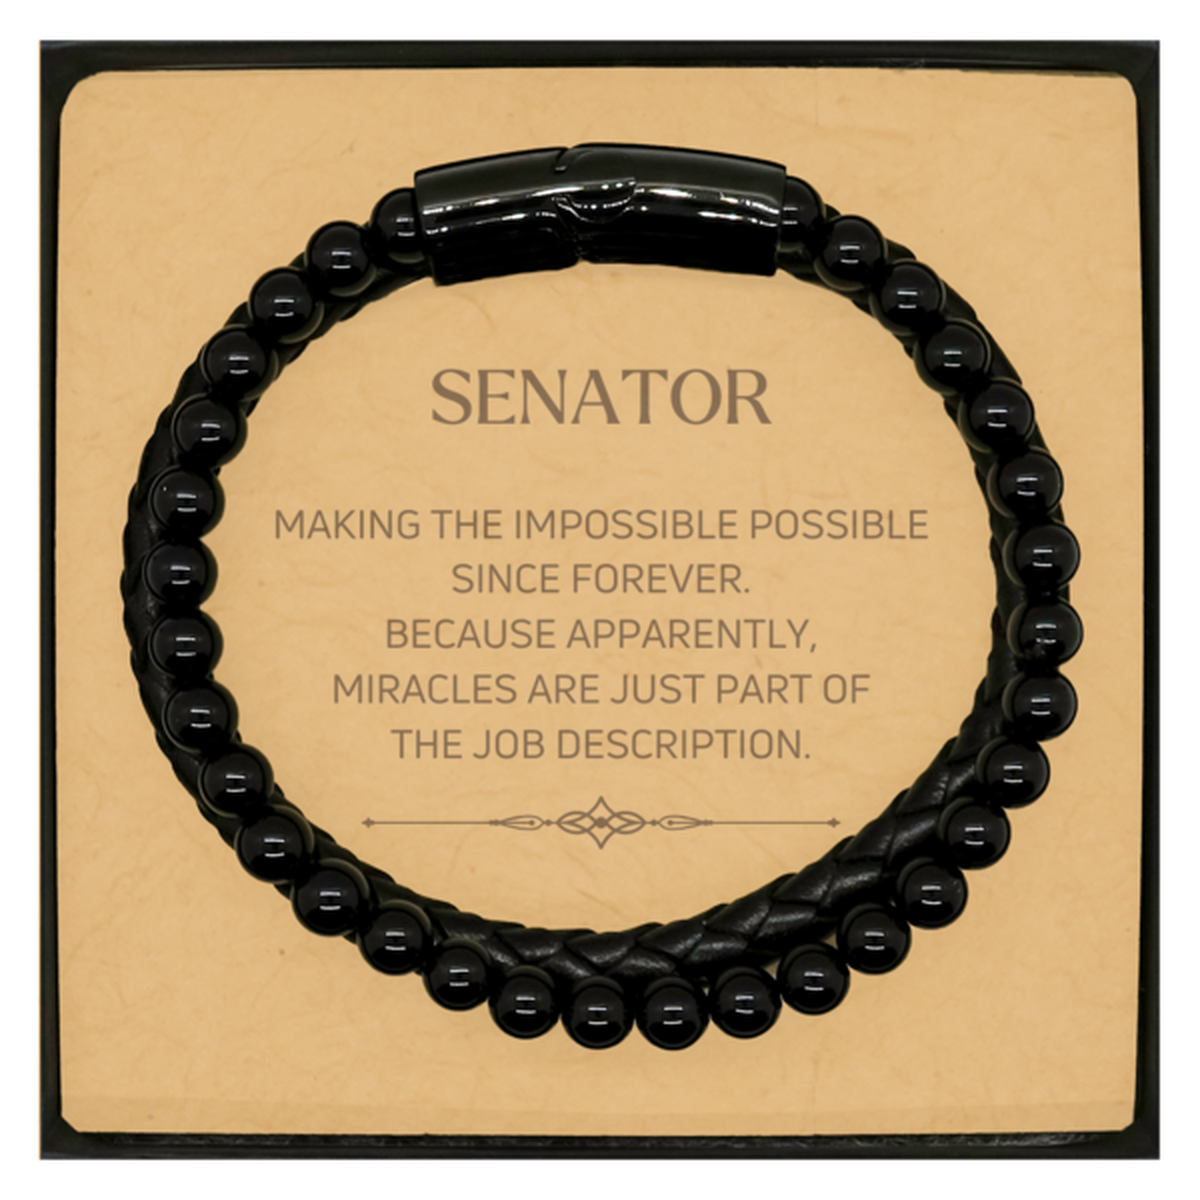 Funny Senator Gifts, Miracles are just part of the job description, Inspirational Birthday Christmas Stone Leather Bracelets For Senator, Men, Women, Coworkers, Friends, Boss